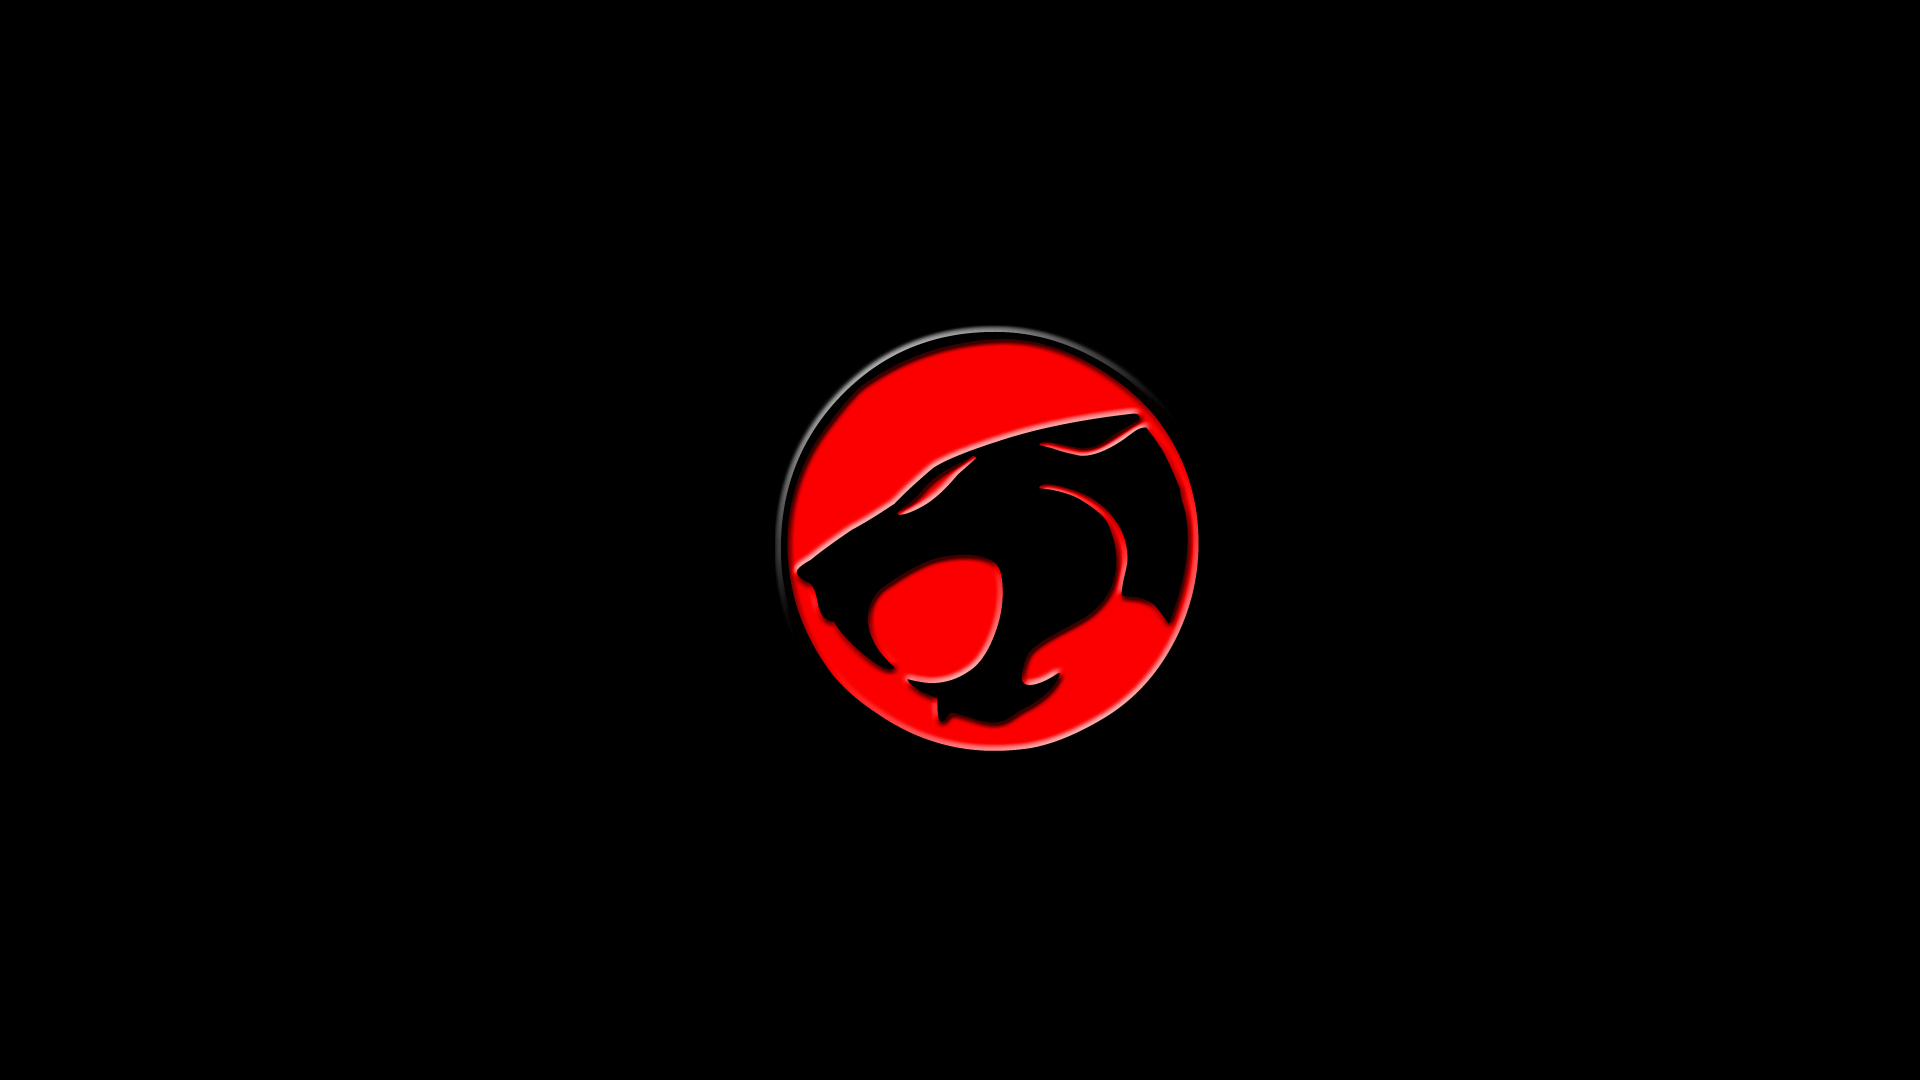 ThunderCats Backgrounds - Wallpaper Cave